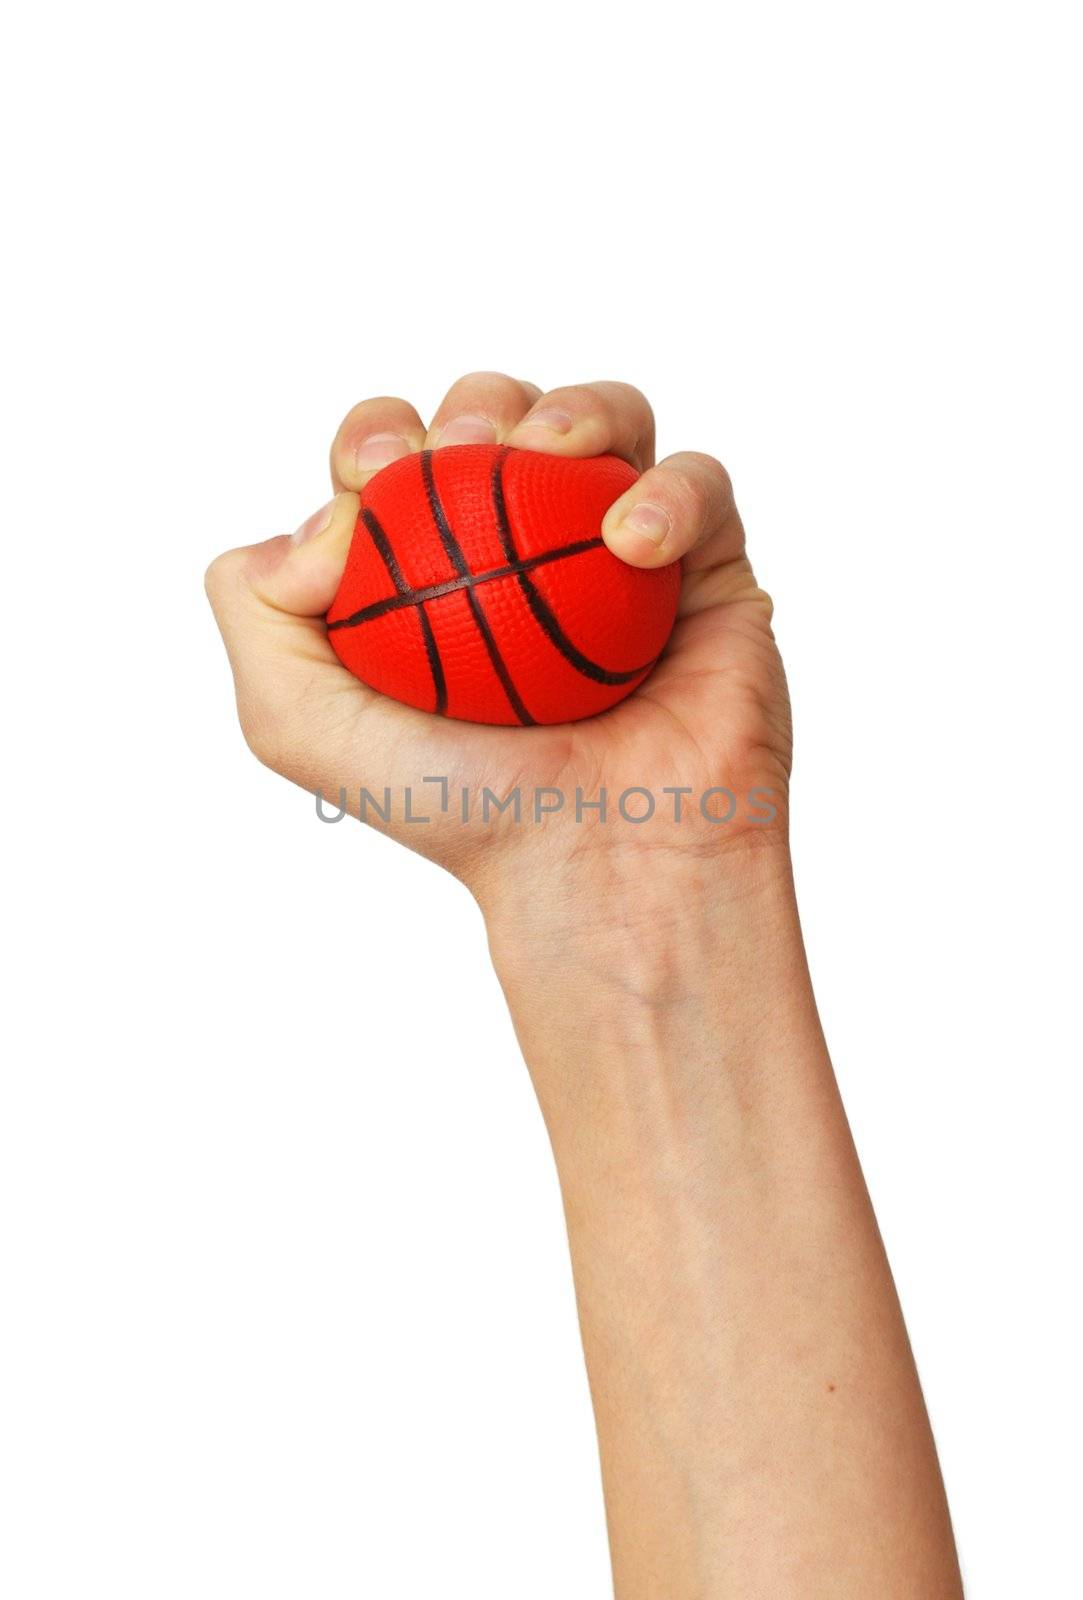 one isolated hand squeezes small sponge basketball toy ball over white background